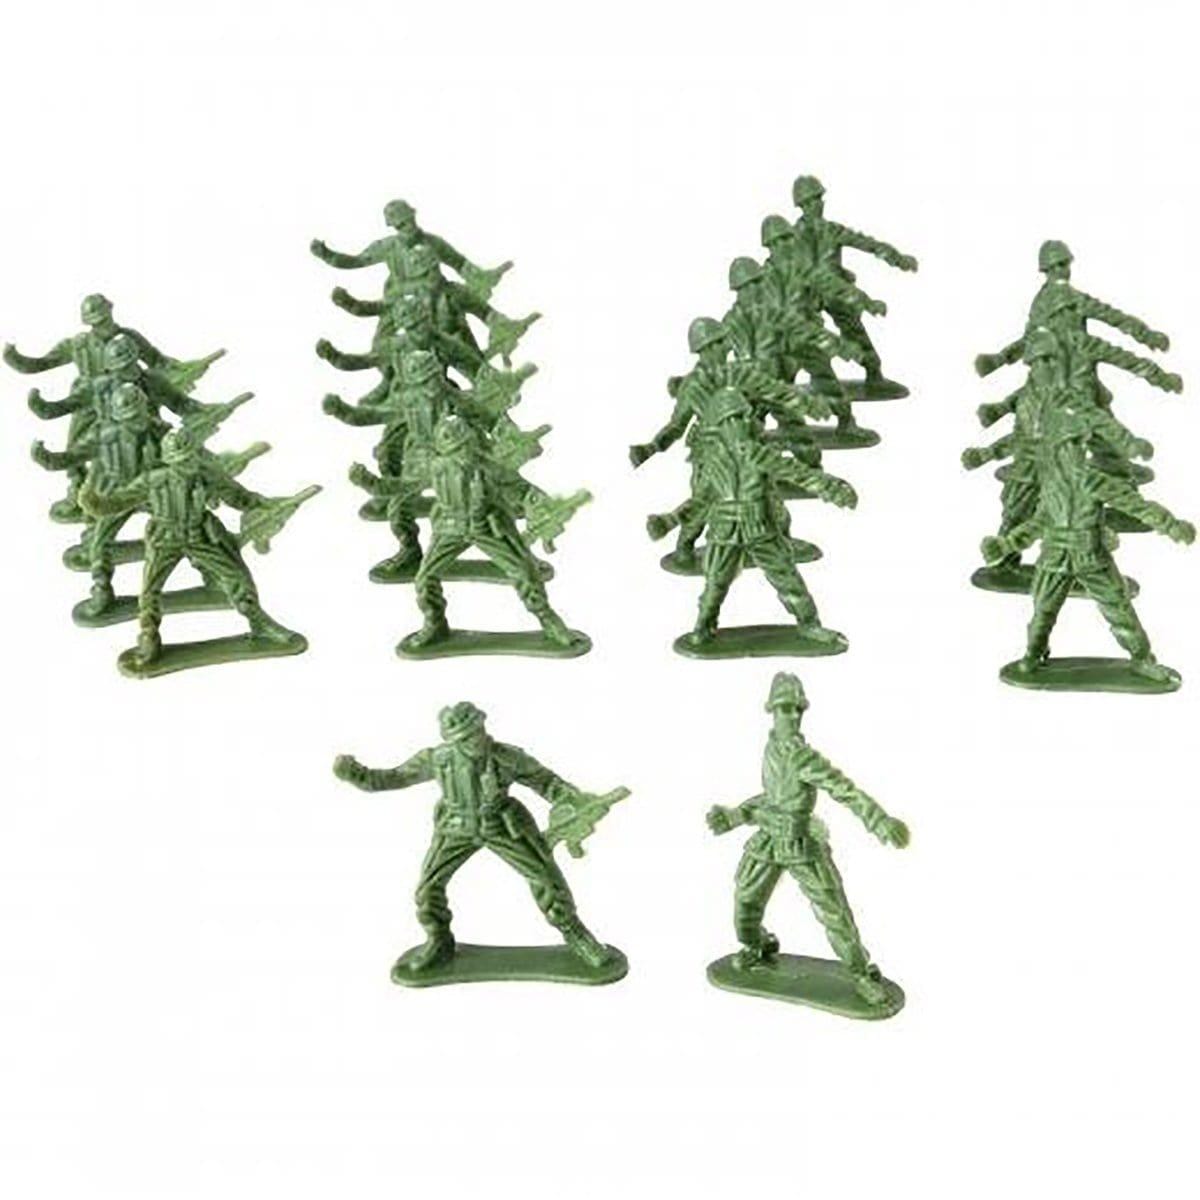 Buy Kids Birthday Camouflage classic army men figurines, 36 per package sold at Party Expert